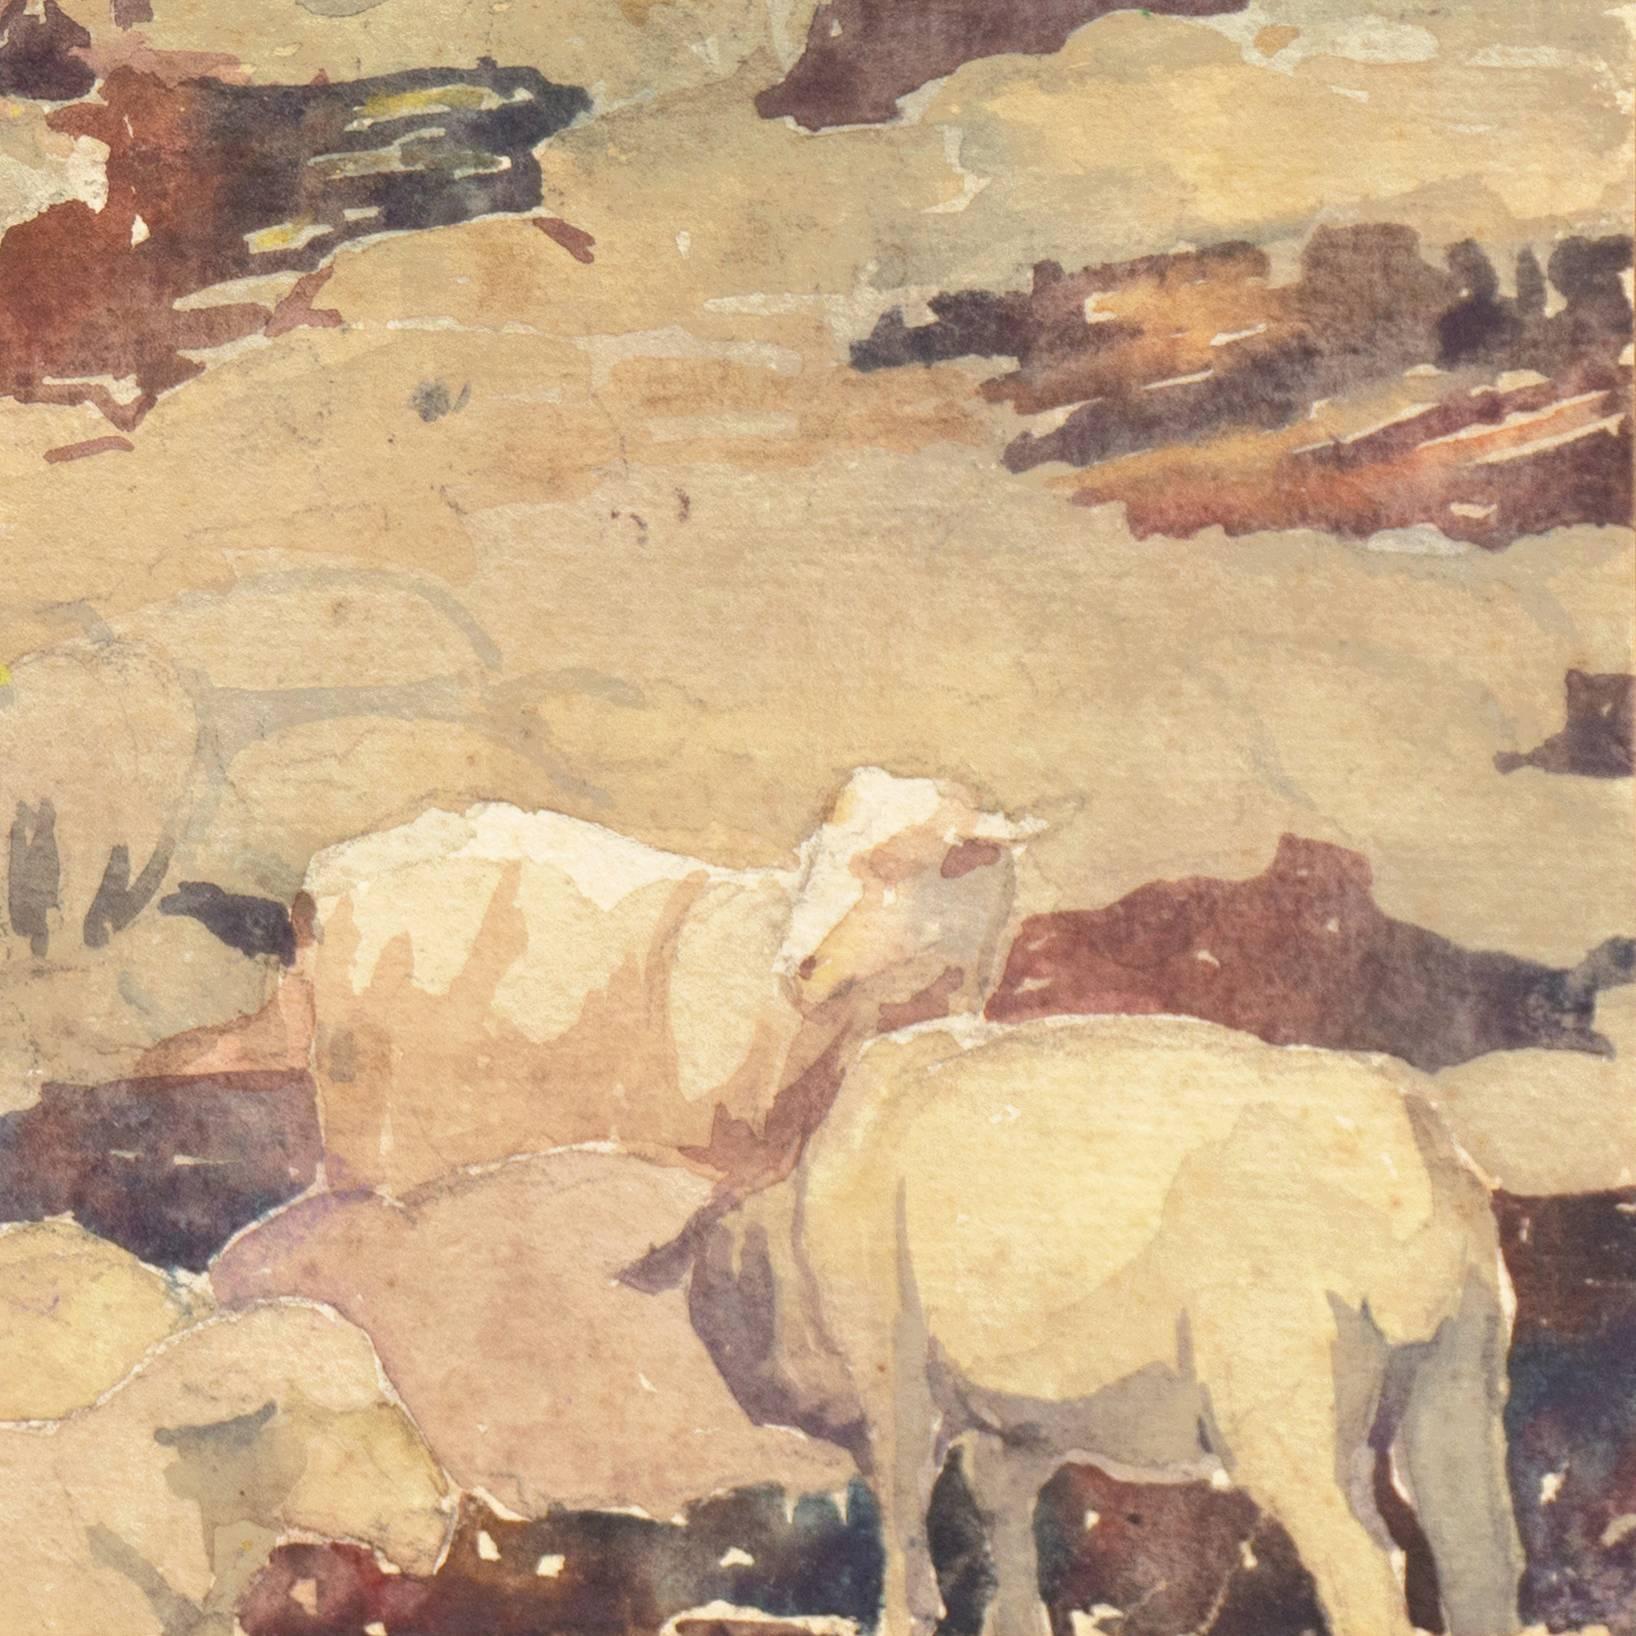 'Landscape with Sheep Grazing', Art Institute of Chicago, Woman Artist 1